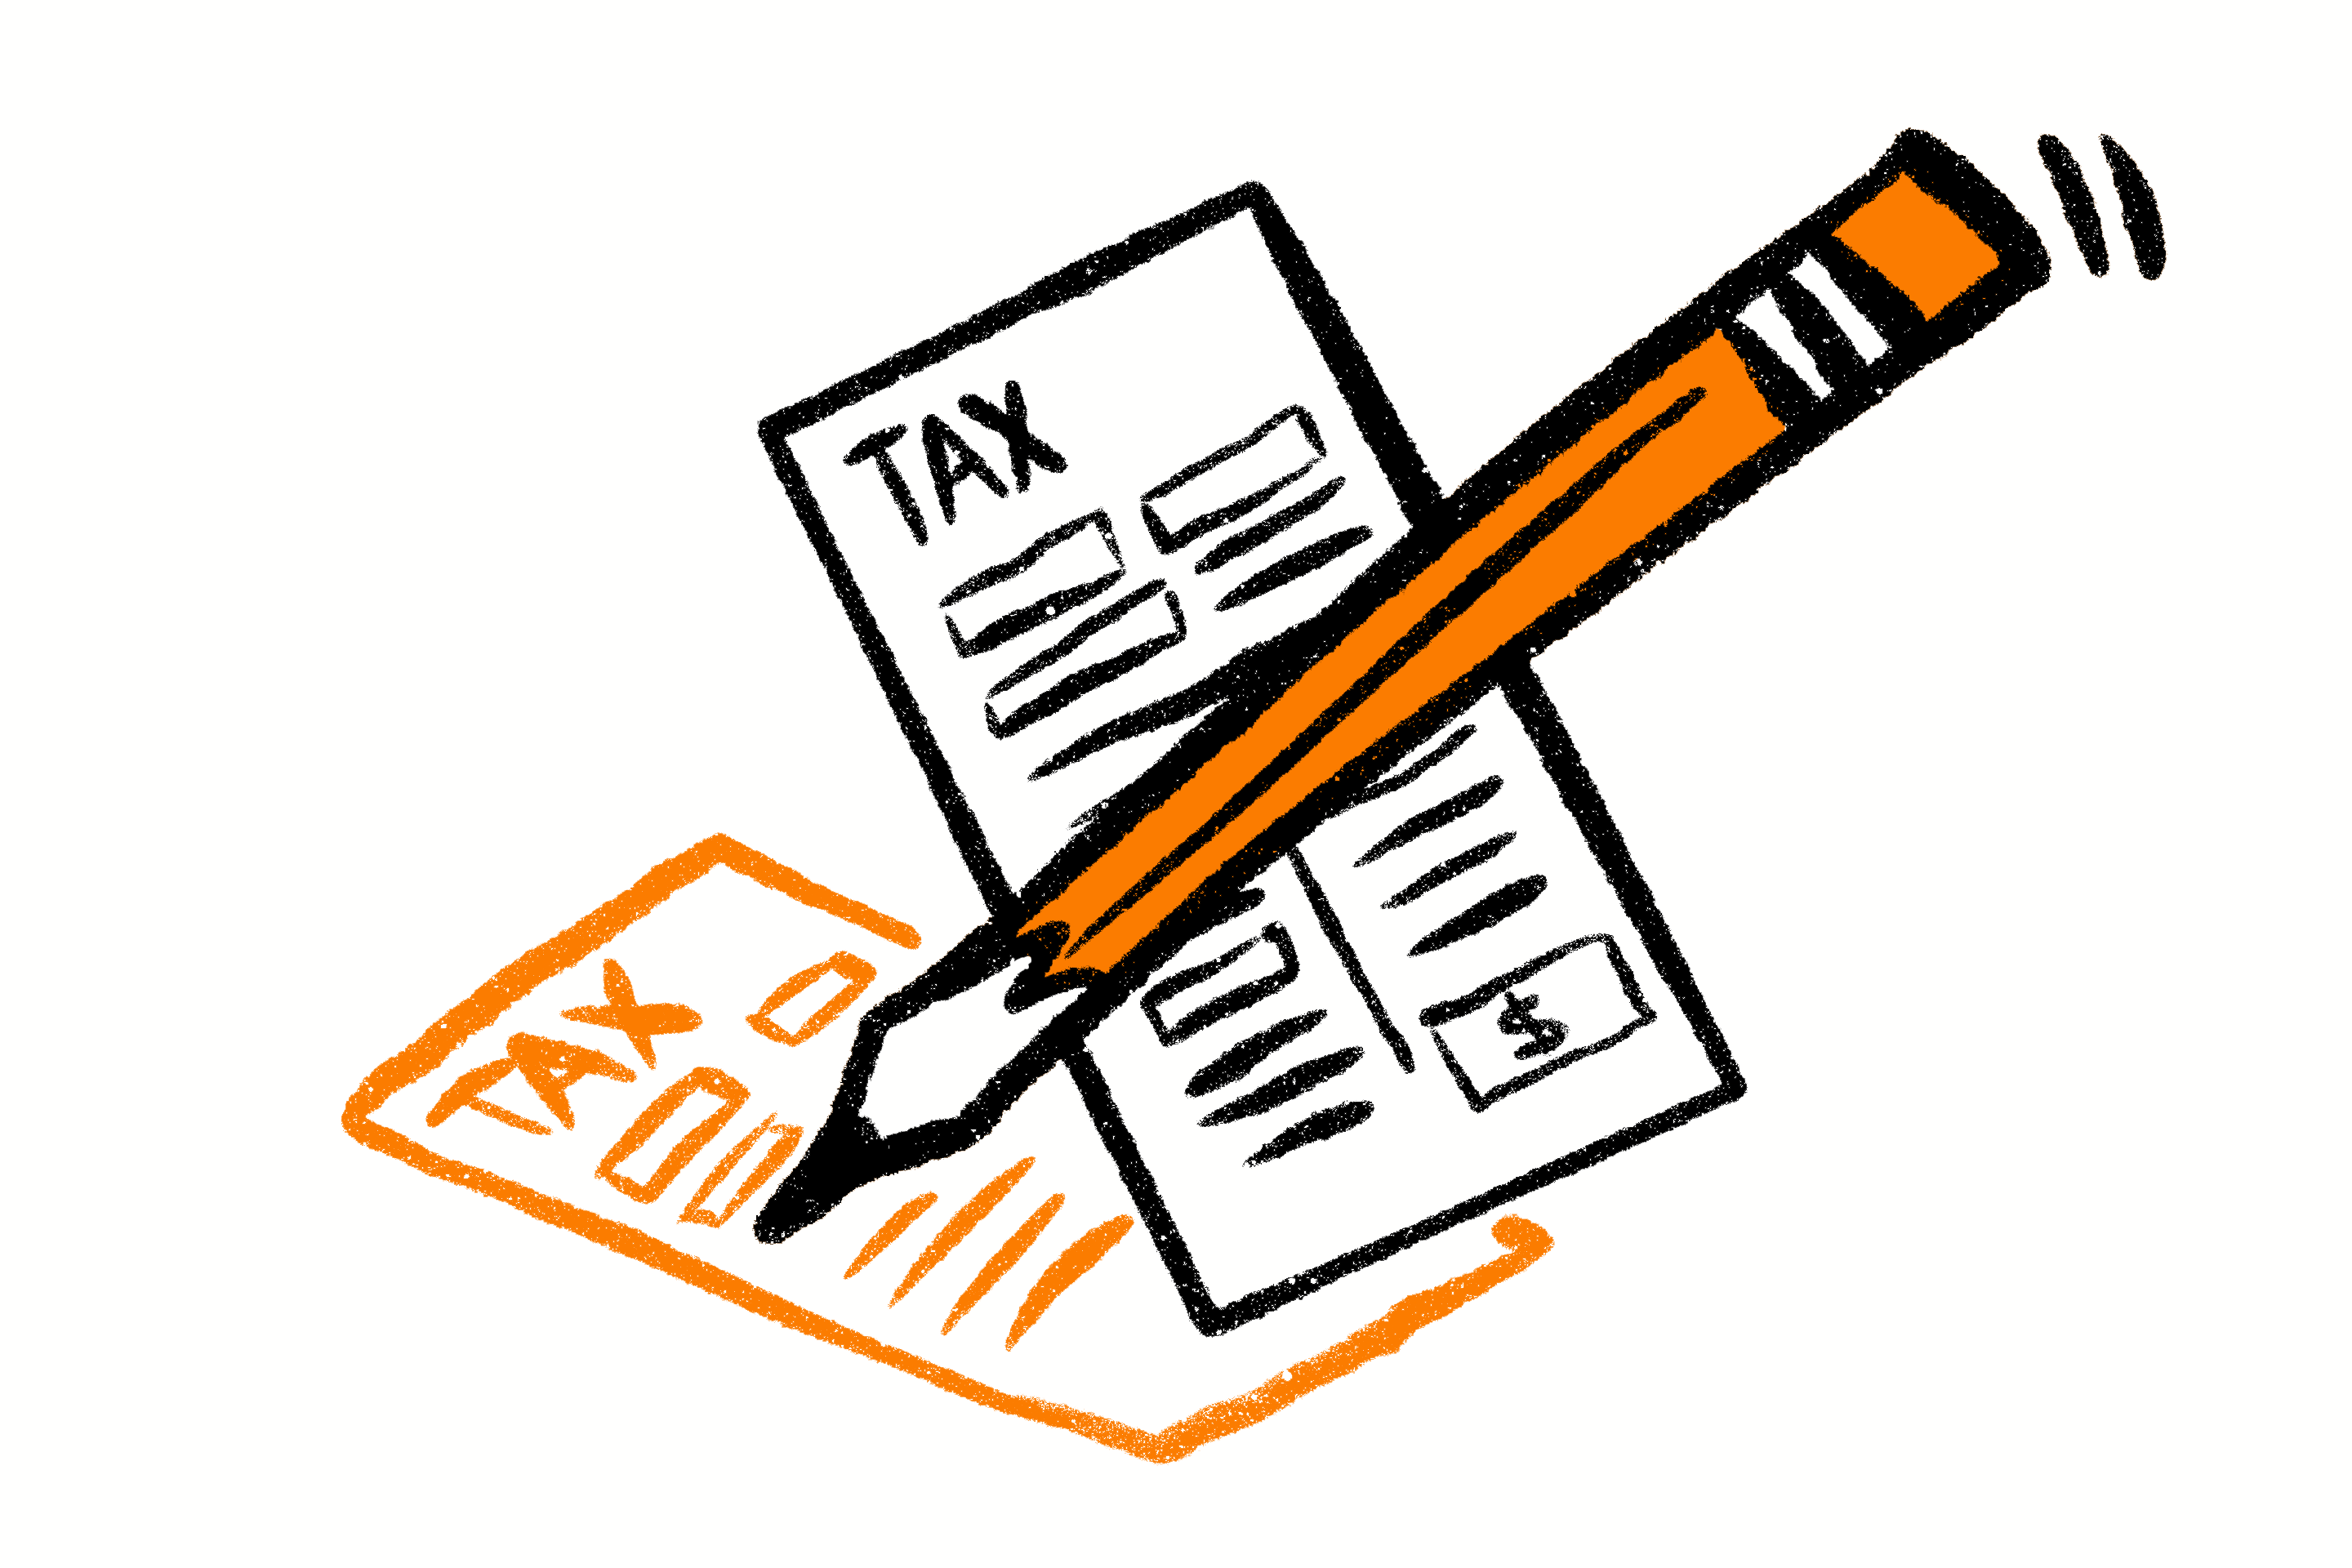 Illustration of two tax papers with pencil